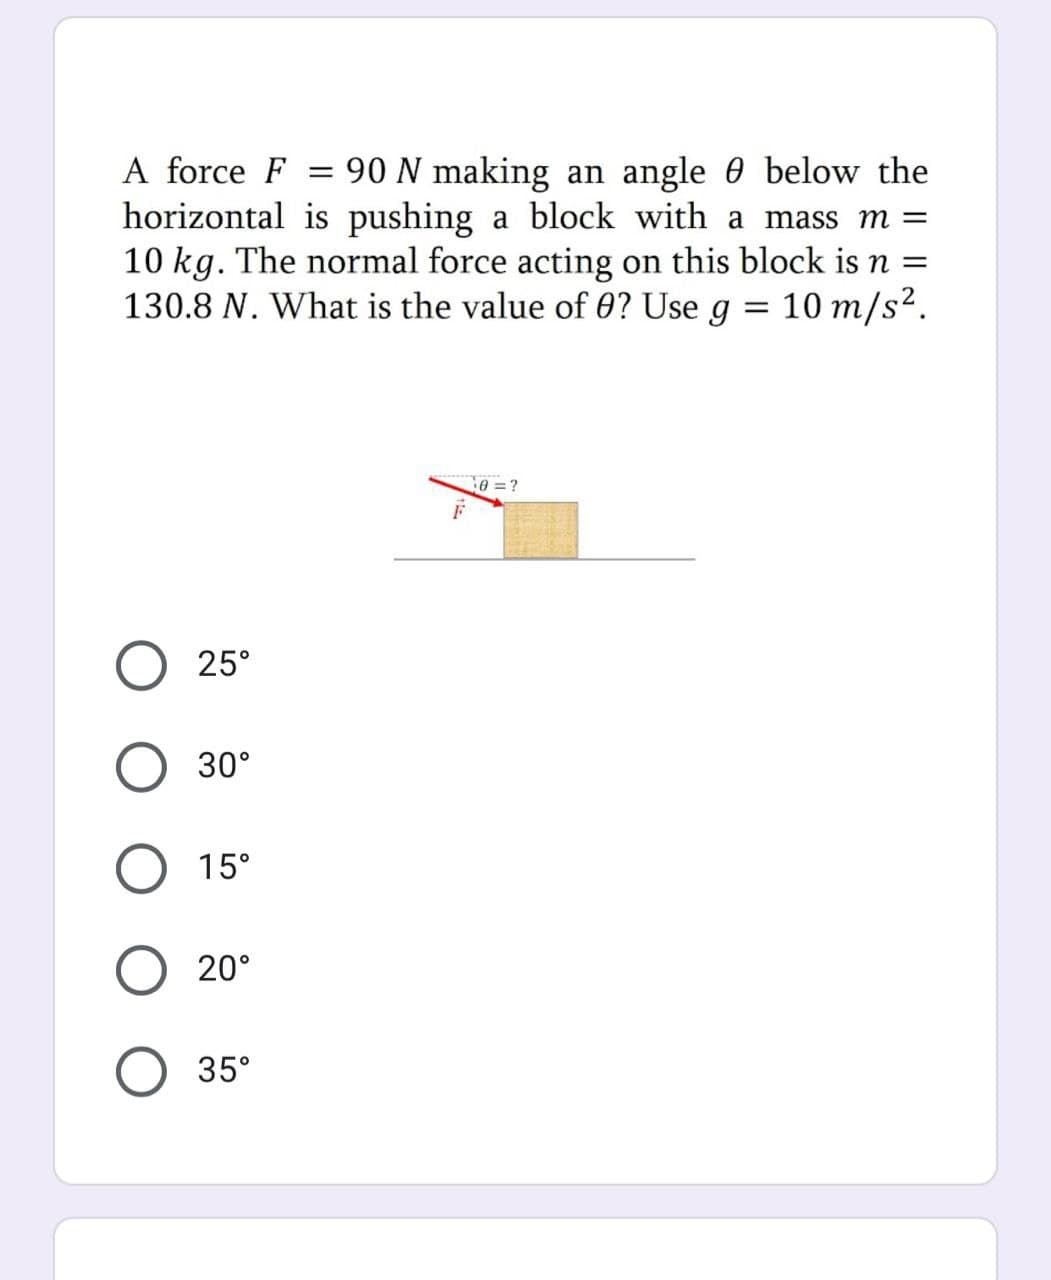 A force F = 90 N making an angle 0 below the
horizontal is pushing a block with a mass m =
10 kg. The normal force acting on this block is n :
130.8 N. What is the value of 0? Use g = 10 m/s².
0 = ?
25°
30°
15°
20°
35°
